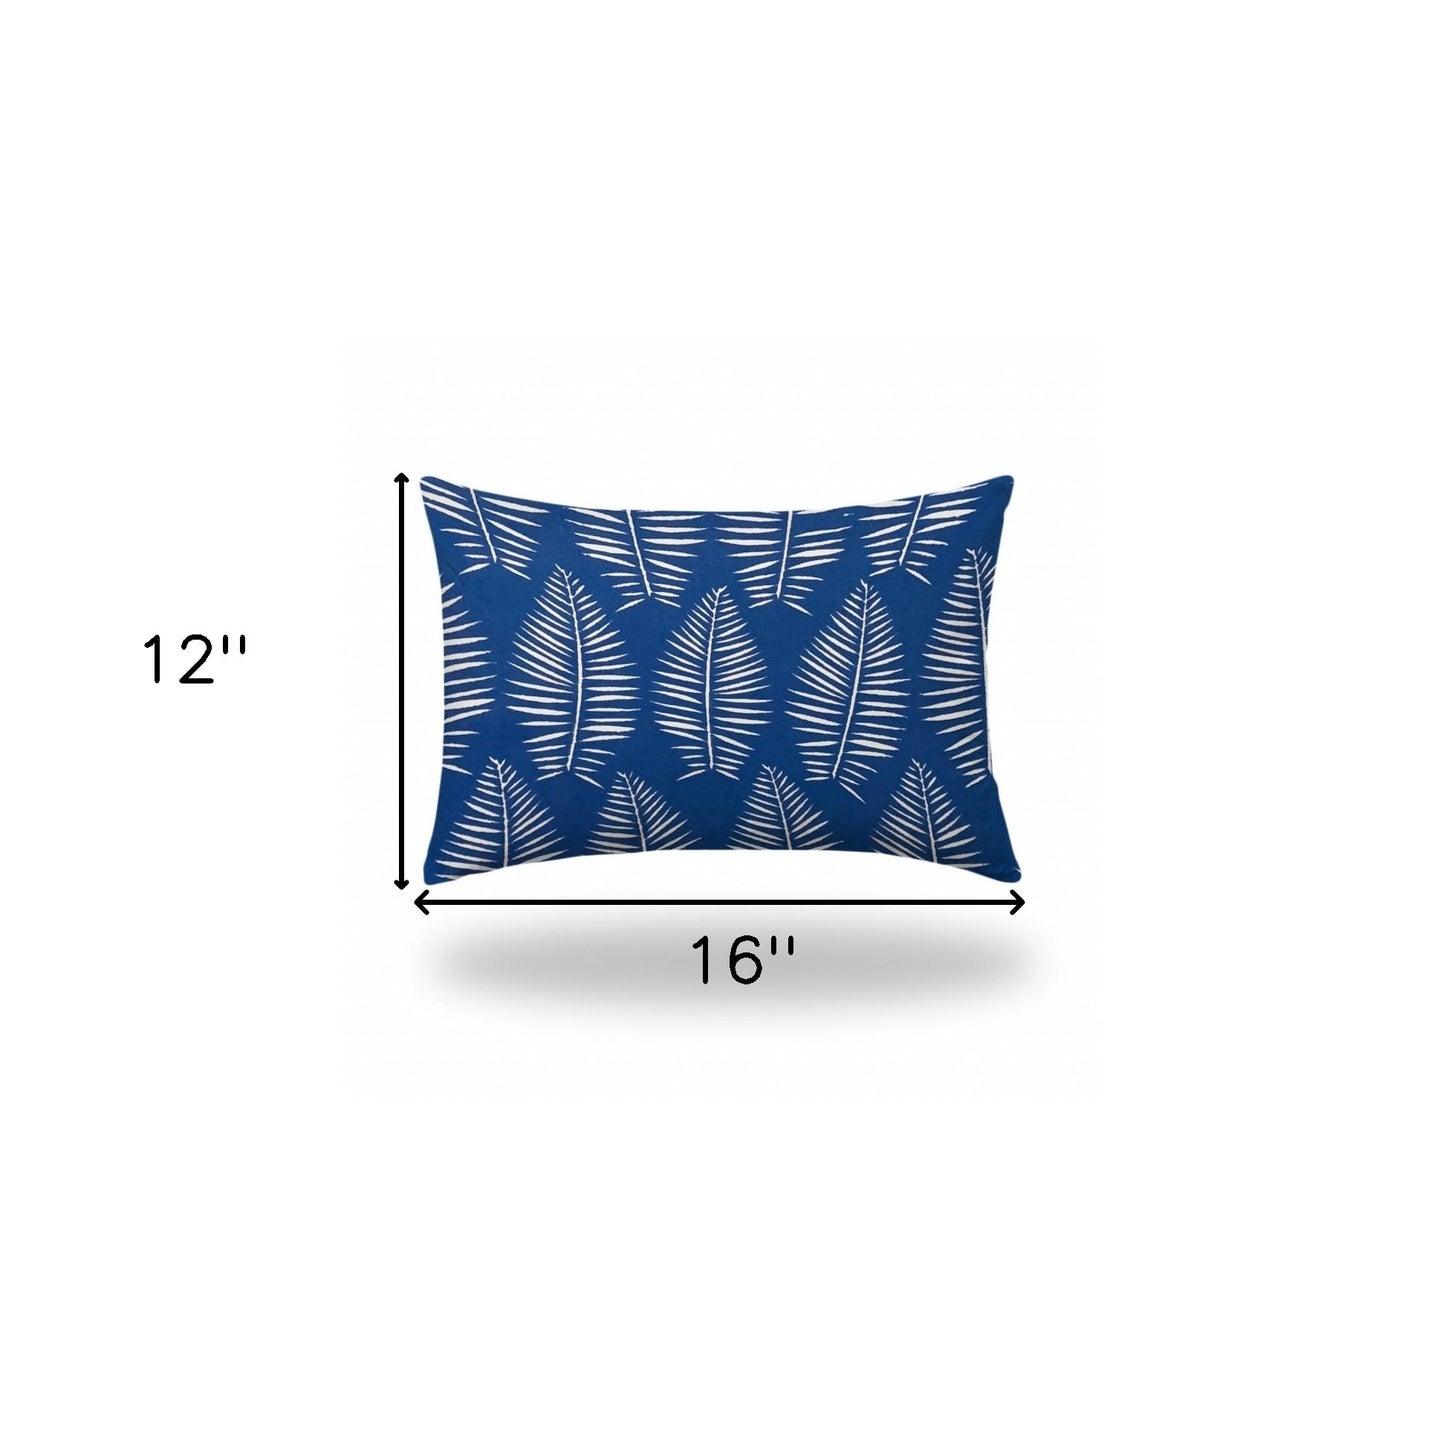 12" X 16" Blue And White Zippered Tropical Lumbar Indoor Outdoor Pillow Cover